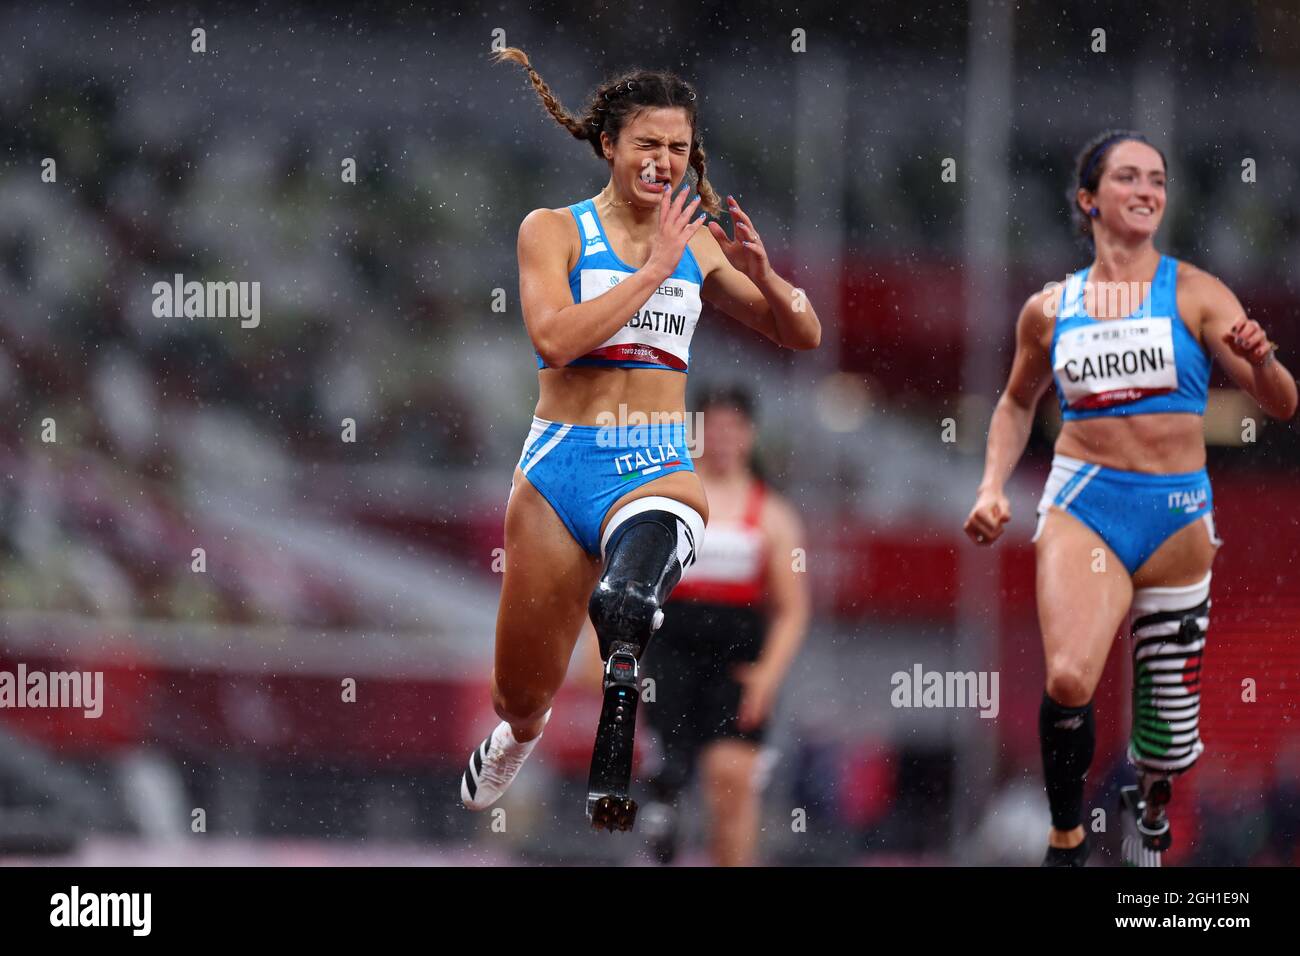 Tokyo 2020 Paralympic Games - Athletics - Women's 100m - T63 Final - Olympic Stadium, Tokyo, Japan - September 4, 2021. Ambra Sabatini of Italy reacts after winning gold and setting a new World Record followed by Martina Caironi of Italy REUTERS/Marko Djurica Stock Photo